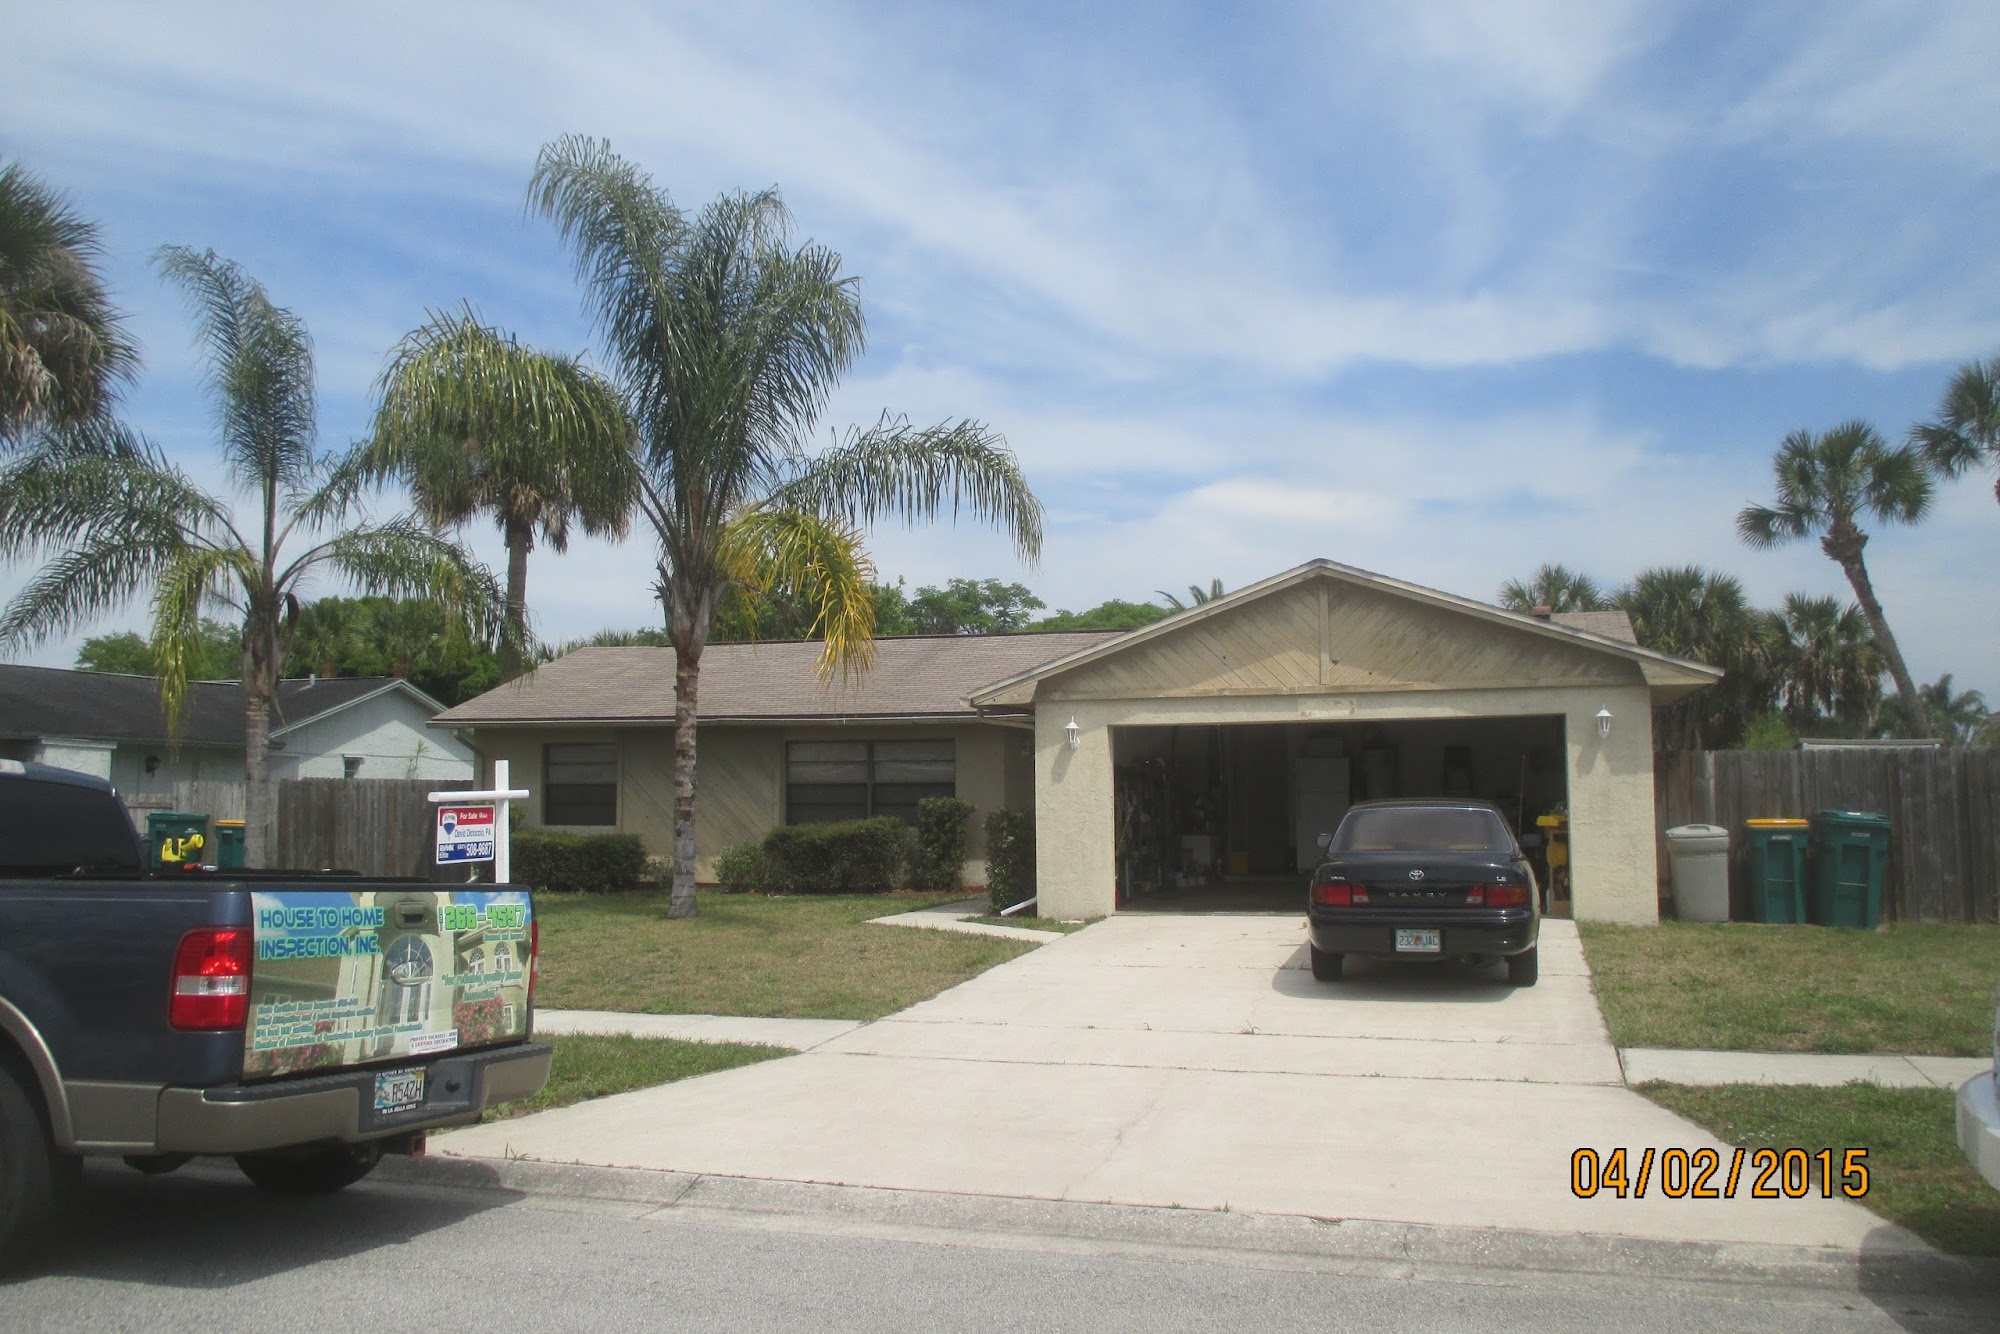 House to Home inspection. Inc. 139 Atlantic Ave, Indialantic Florida 32903